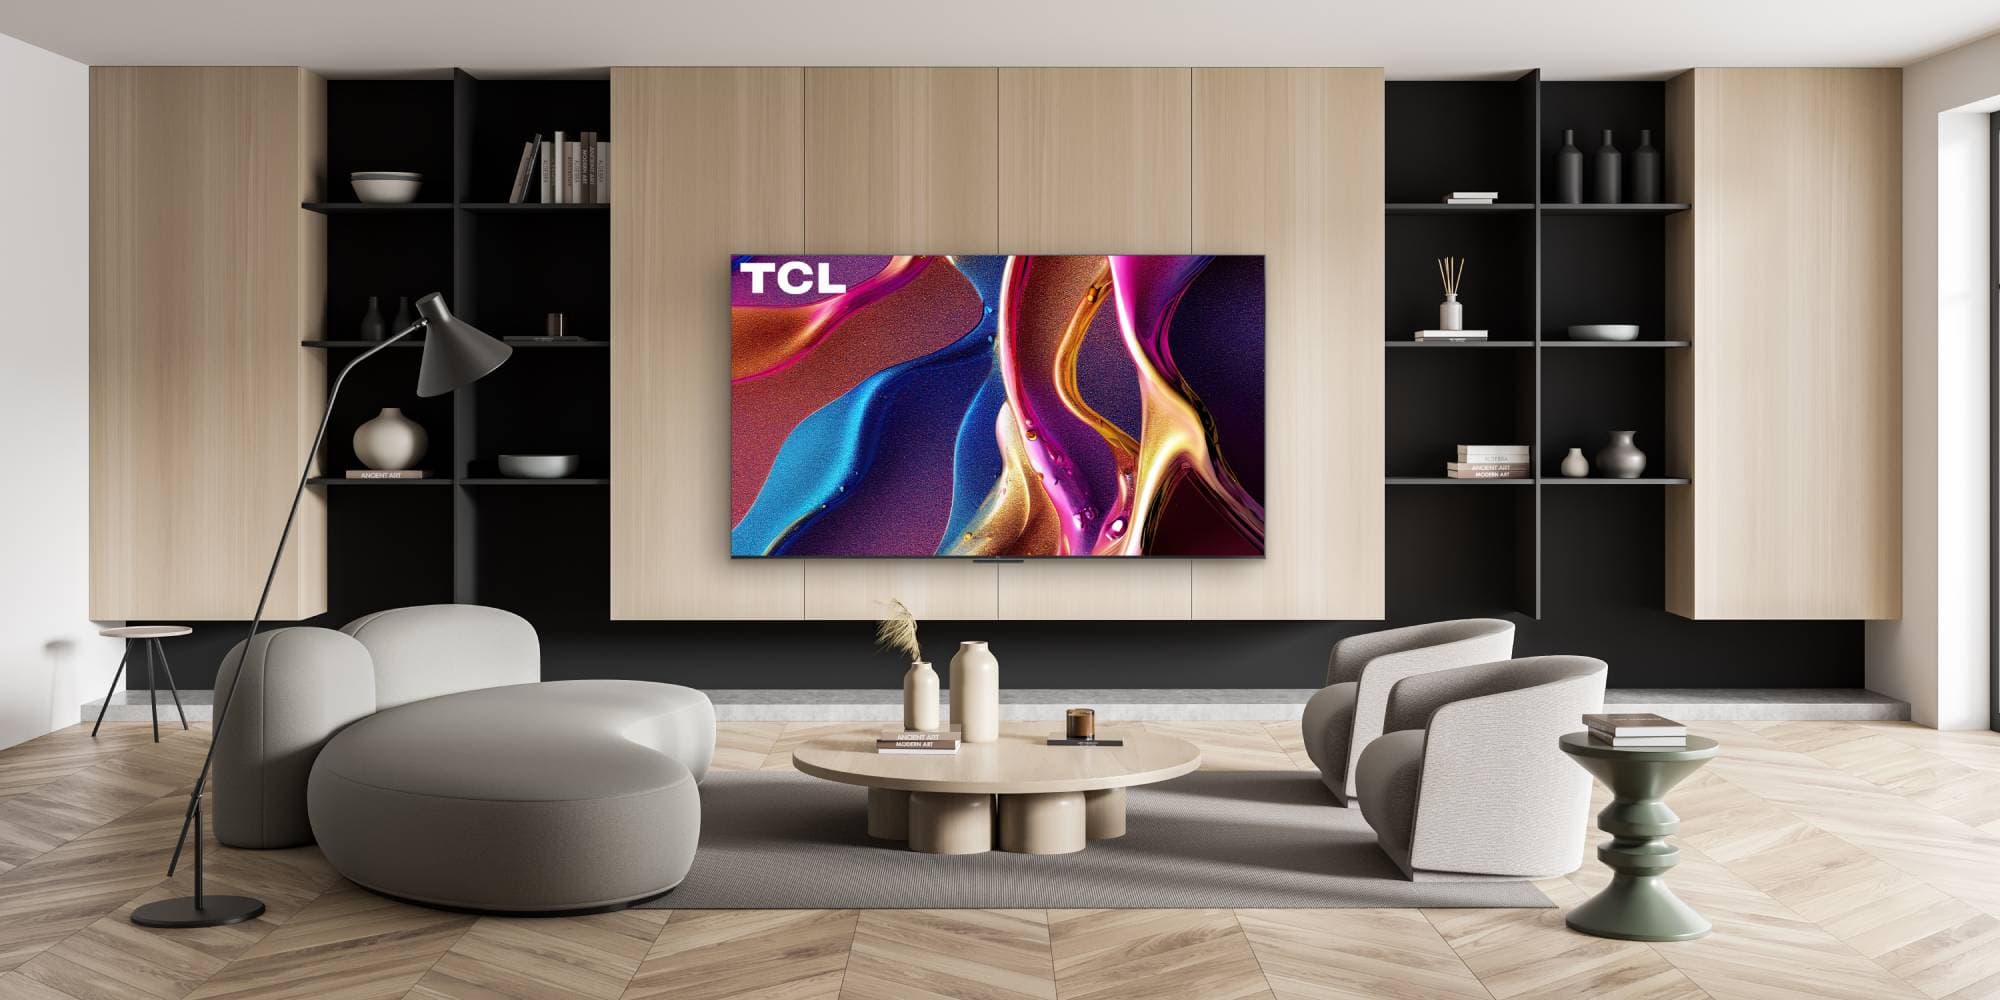 TCL is offering $200 off of NFL Sunday Ticket if you buy a new TV